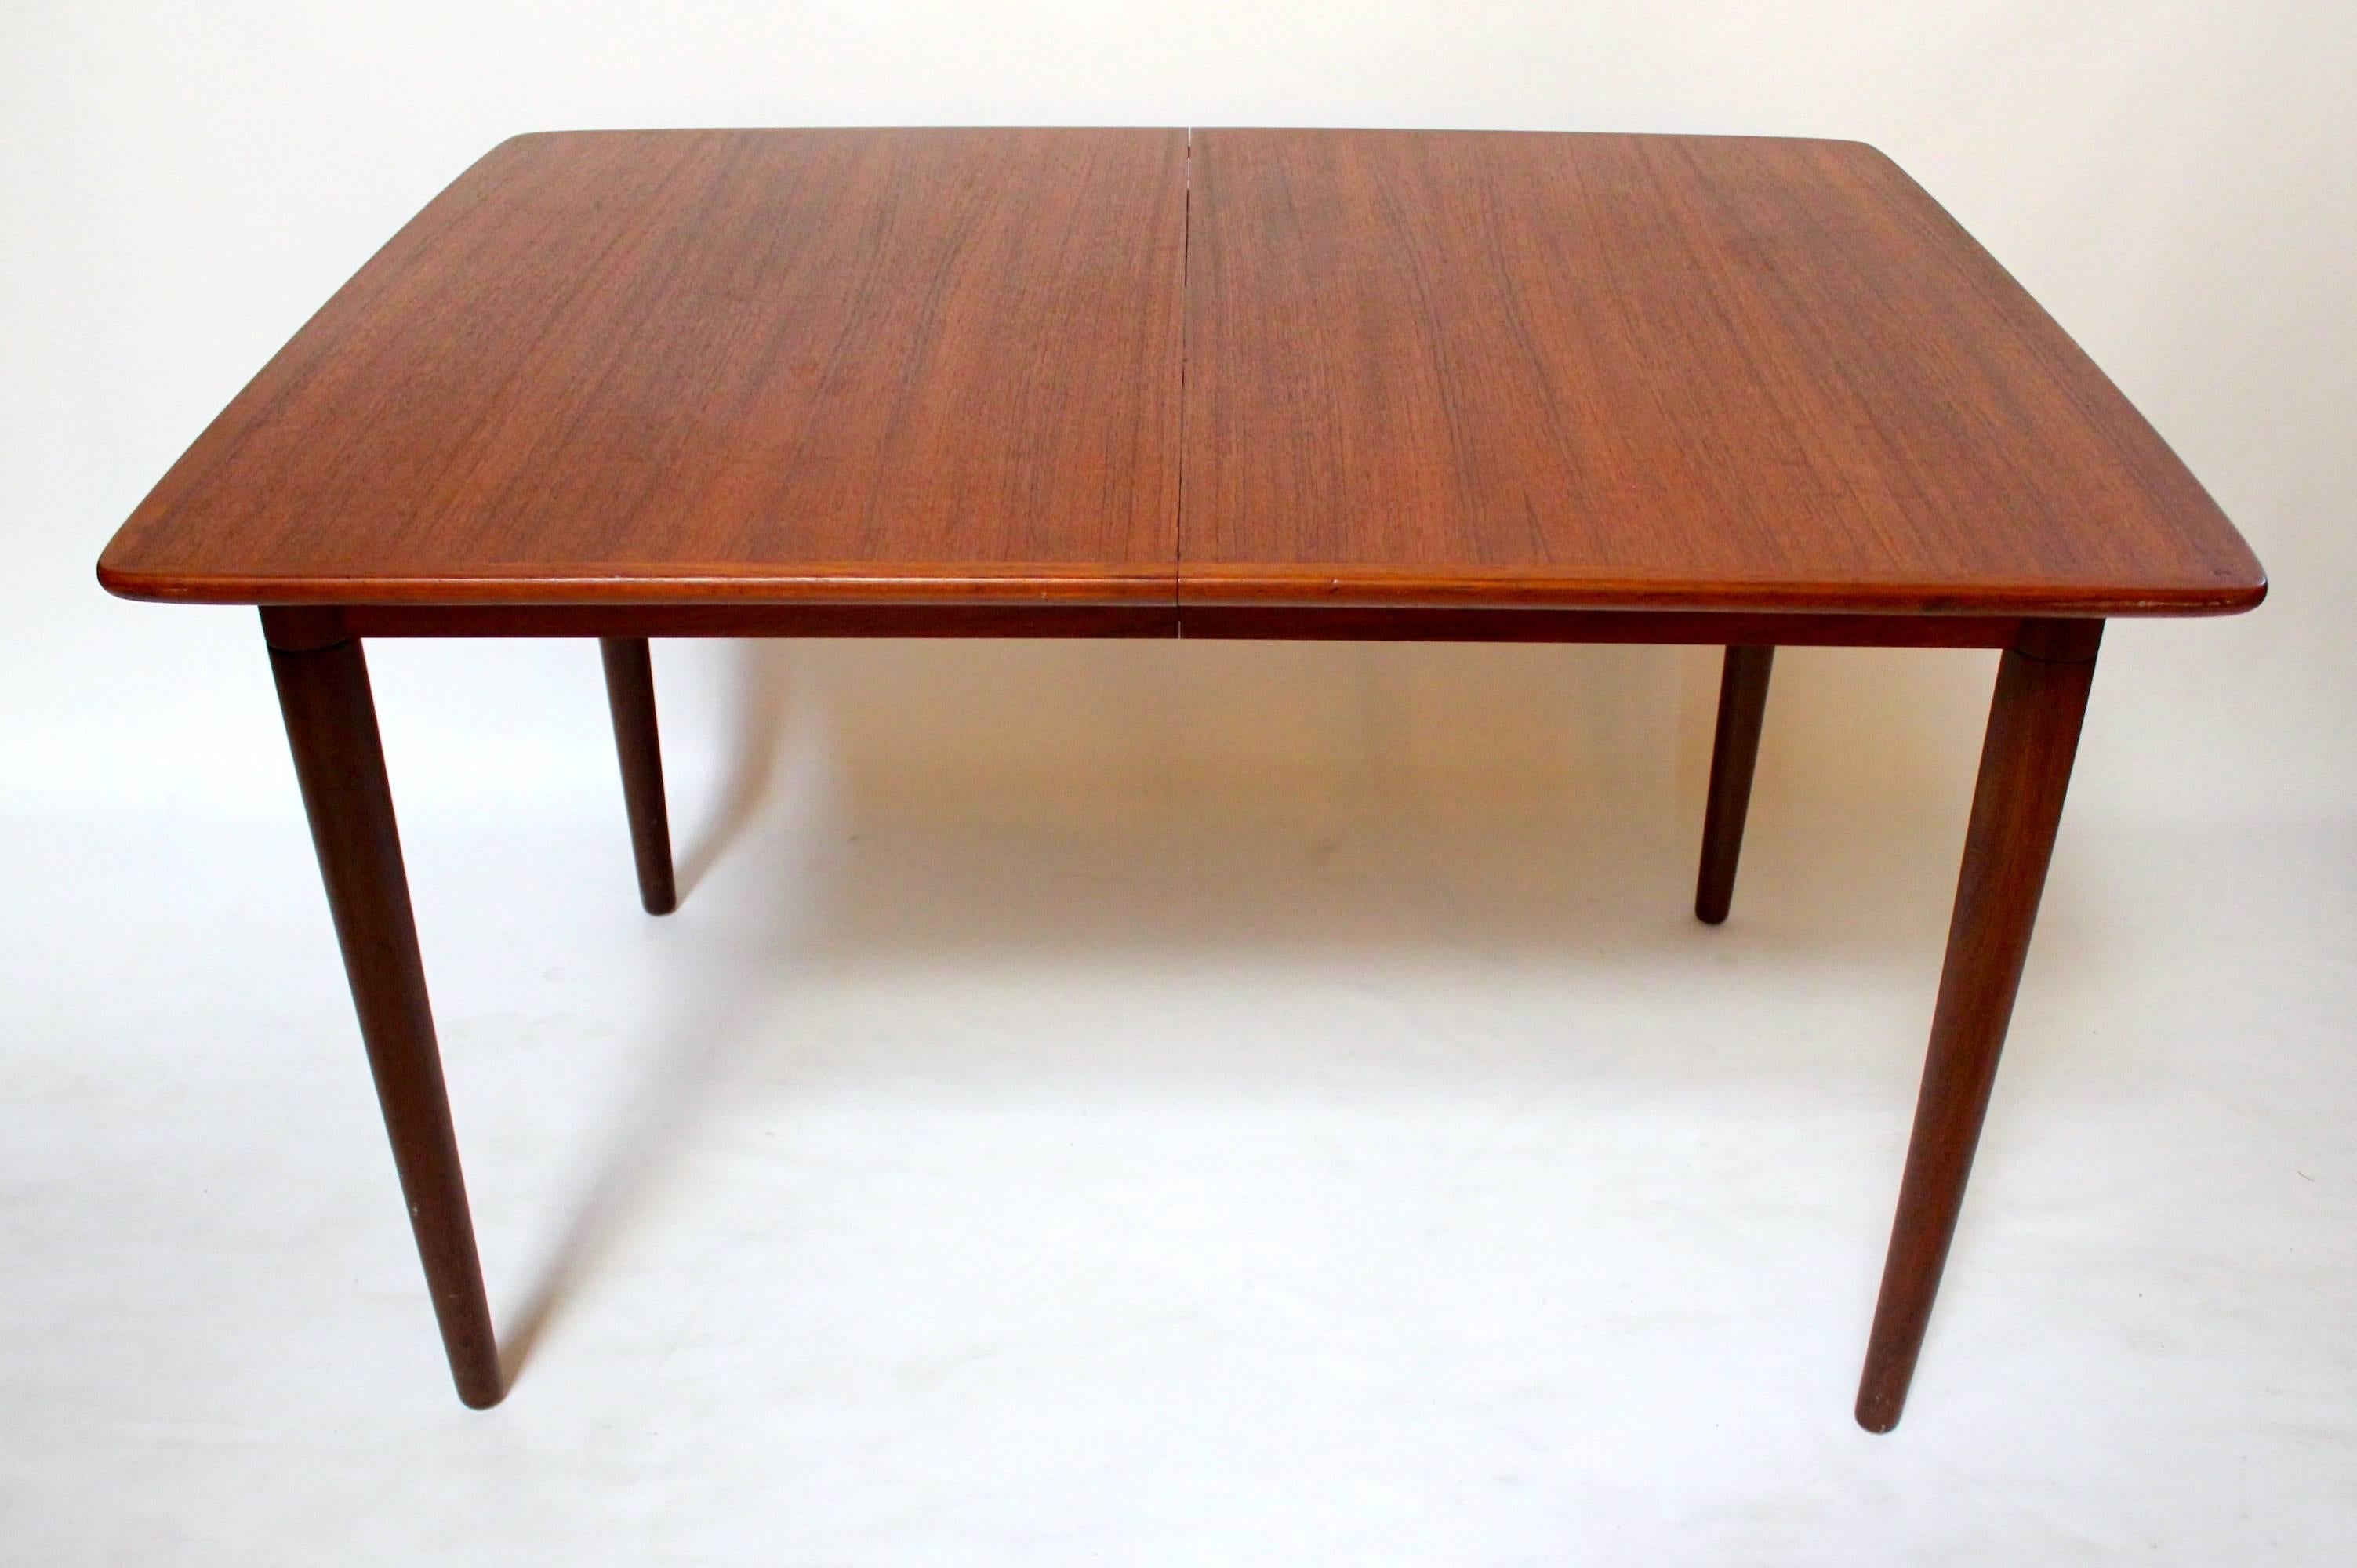 1960s Danish modern teak dining table with two leaves. Leaves store inside the table when not in use. In excellent condition with no marks or sun fading. Without leaves, the table measures 47